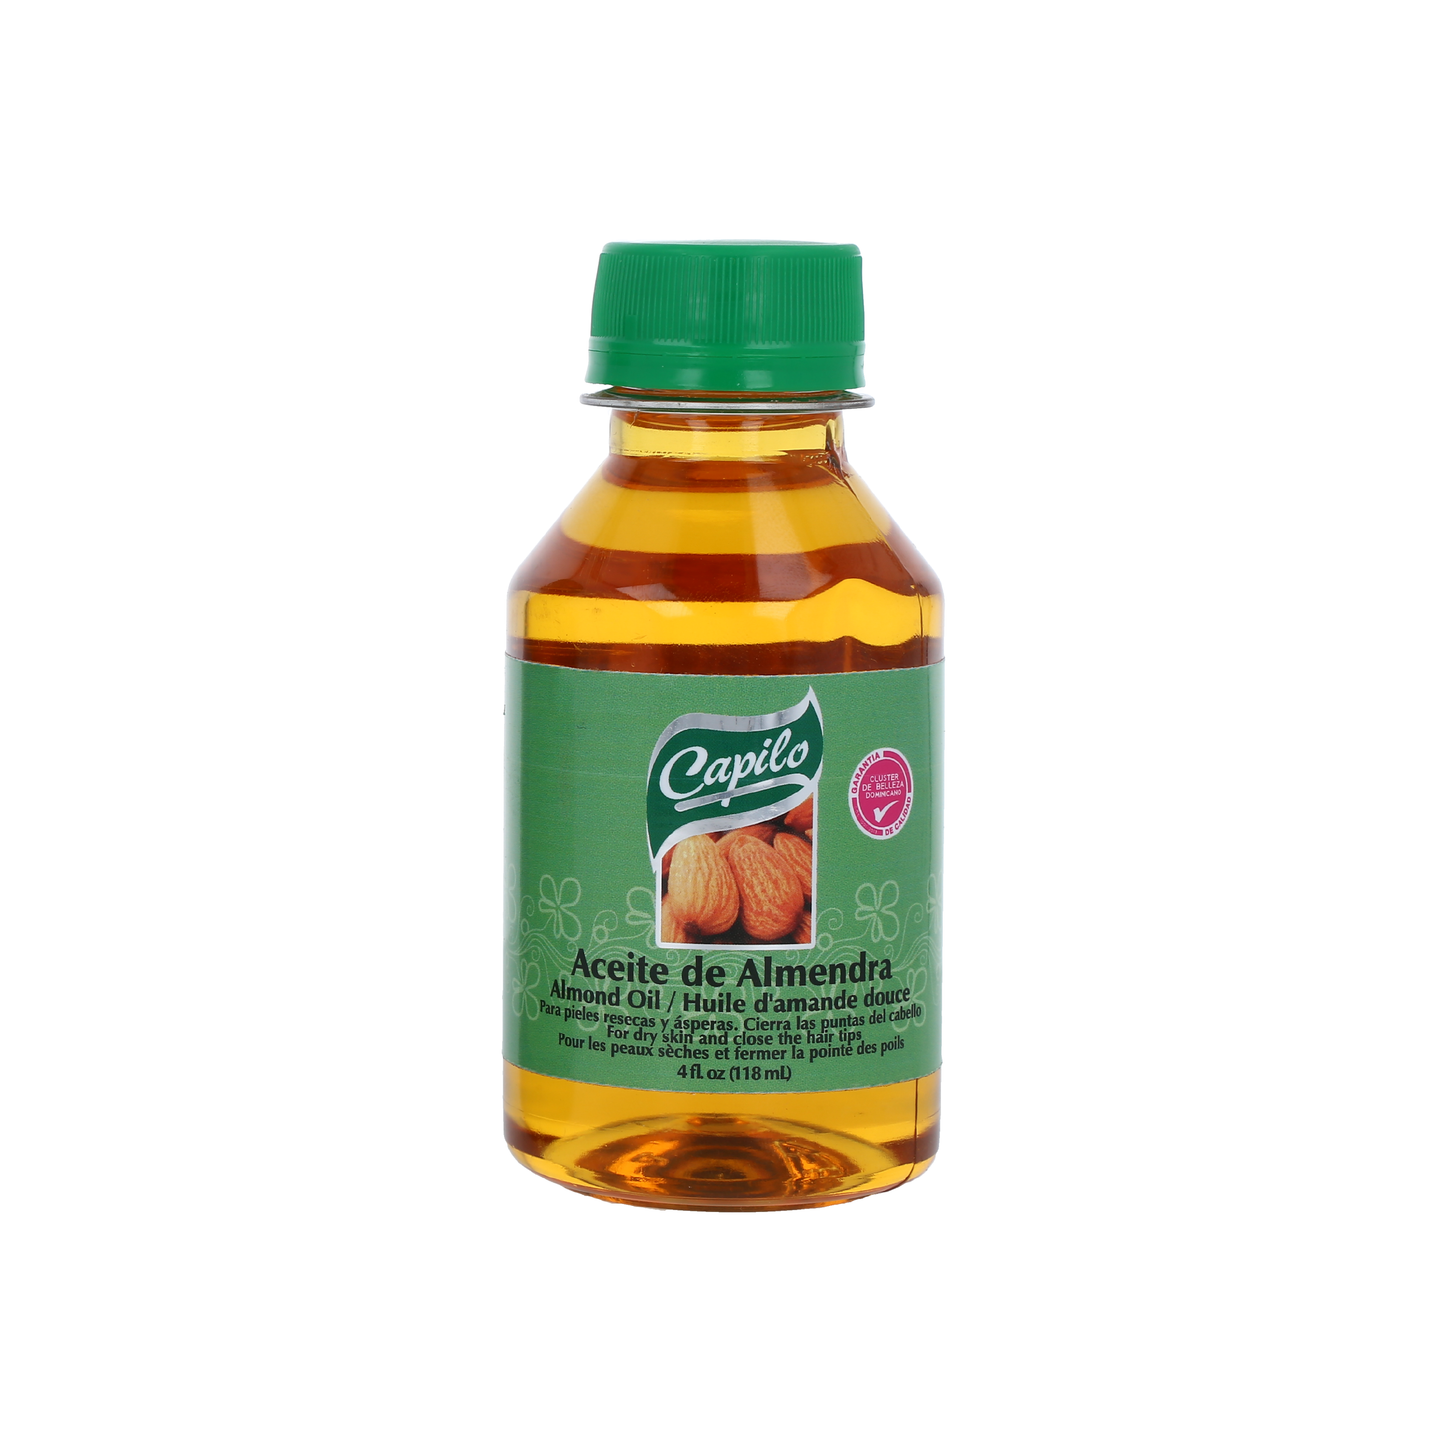 Capilo Almond Oil 4 oz. | Nourish Hair and Hydrates Skin | Mineral Oil + Almond Oil | Parabens and sulfate free